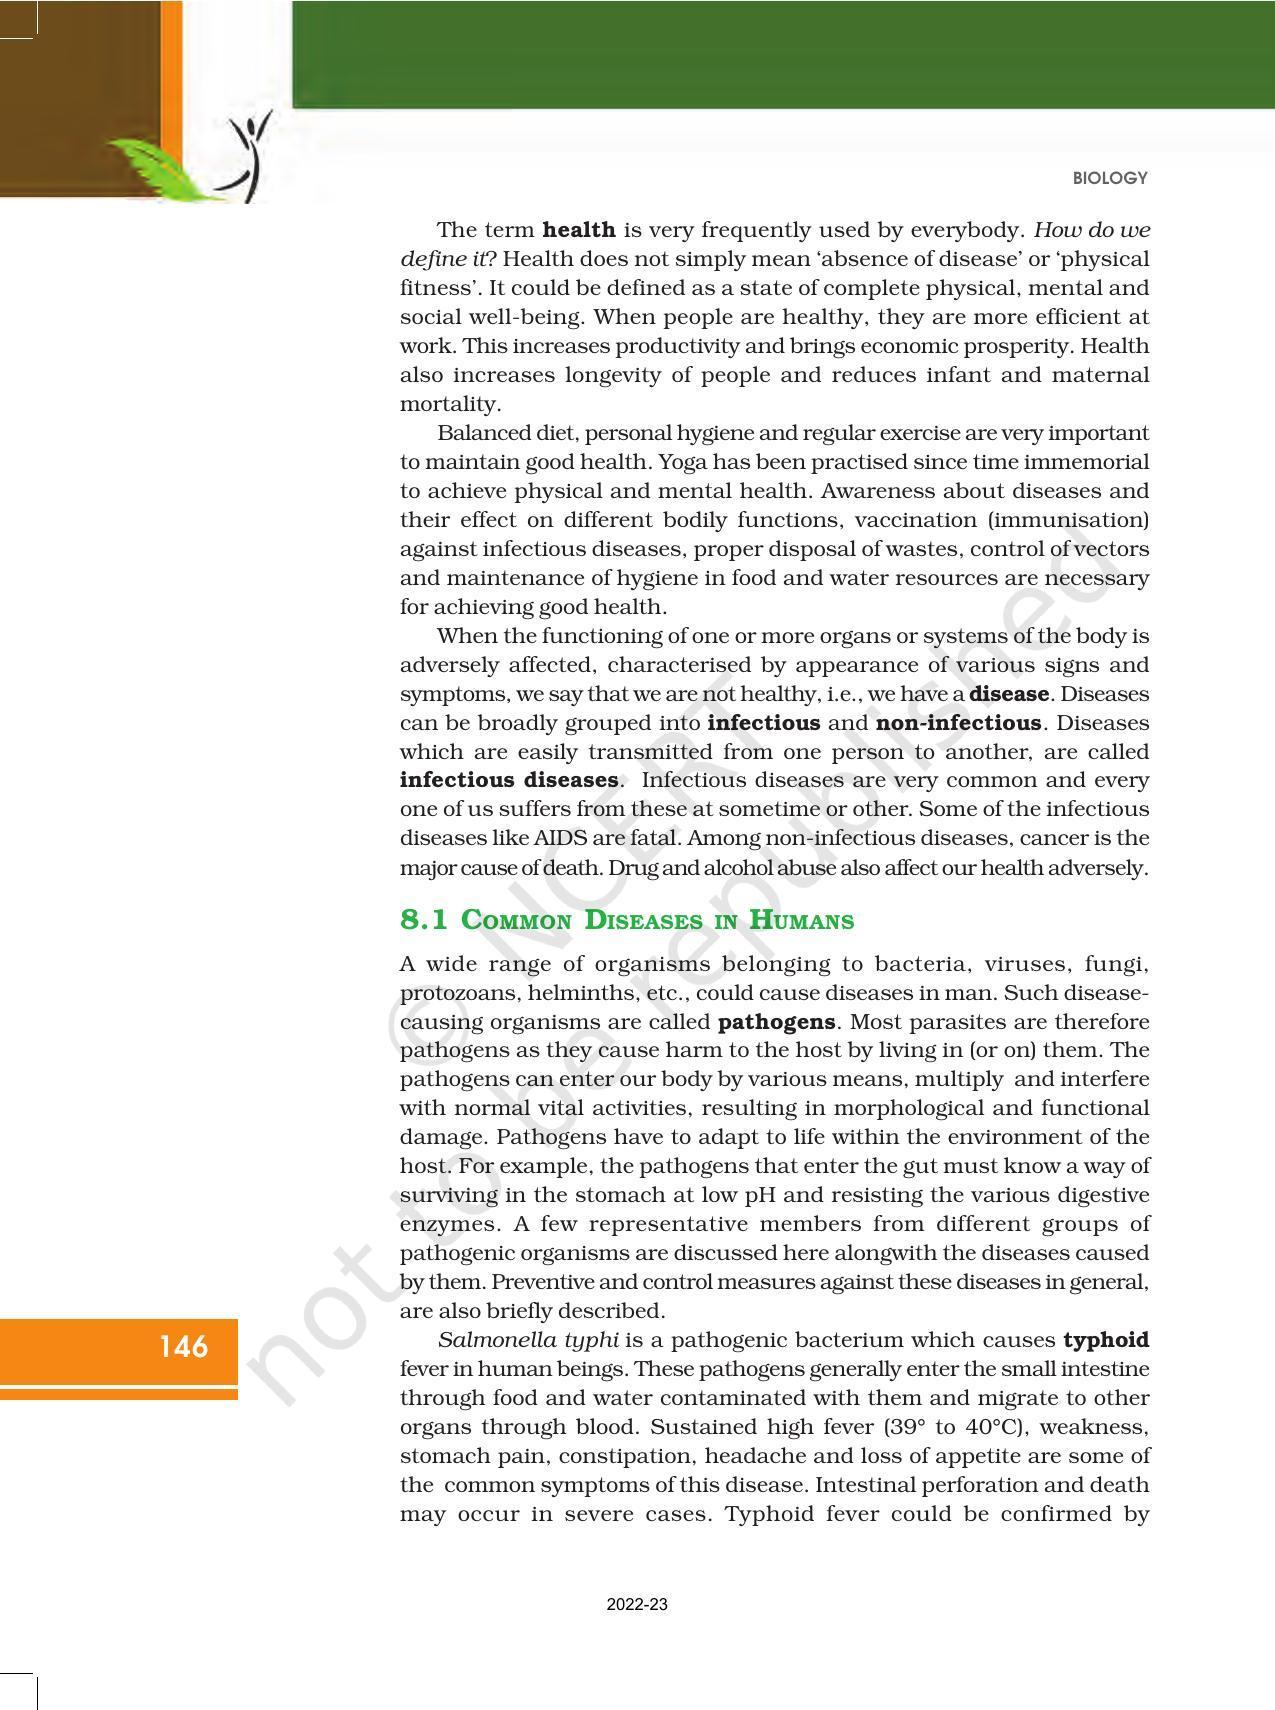 NCERT Book for Class 12 Biology Chapter 8 Human Health and Disease - Page 4